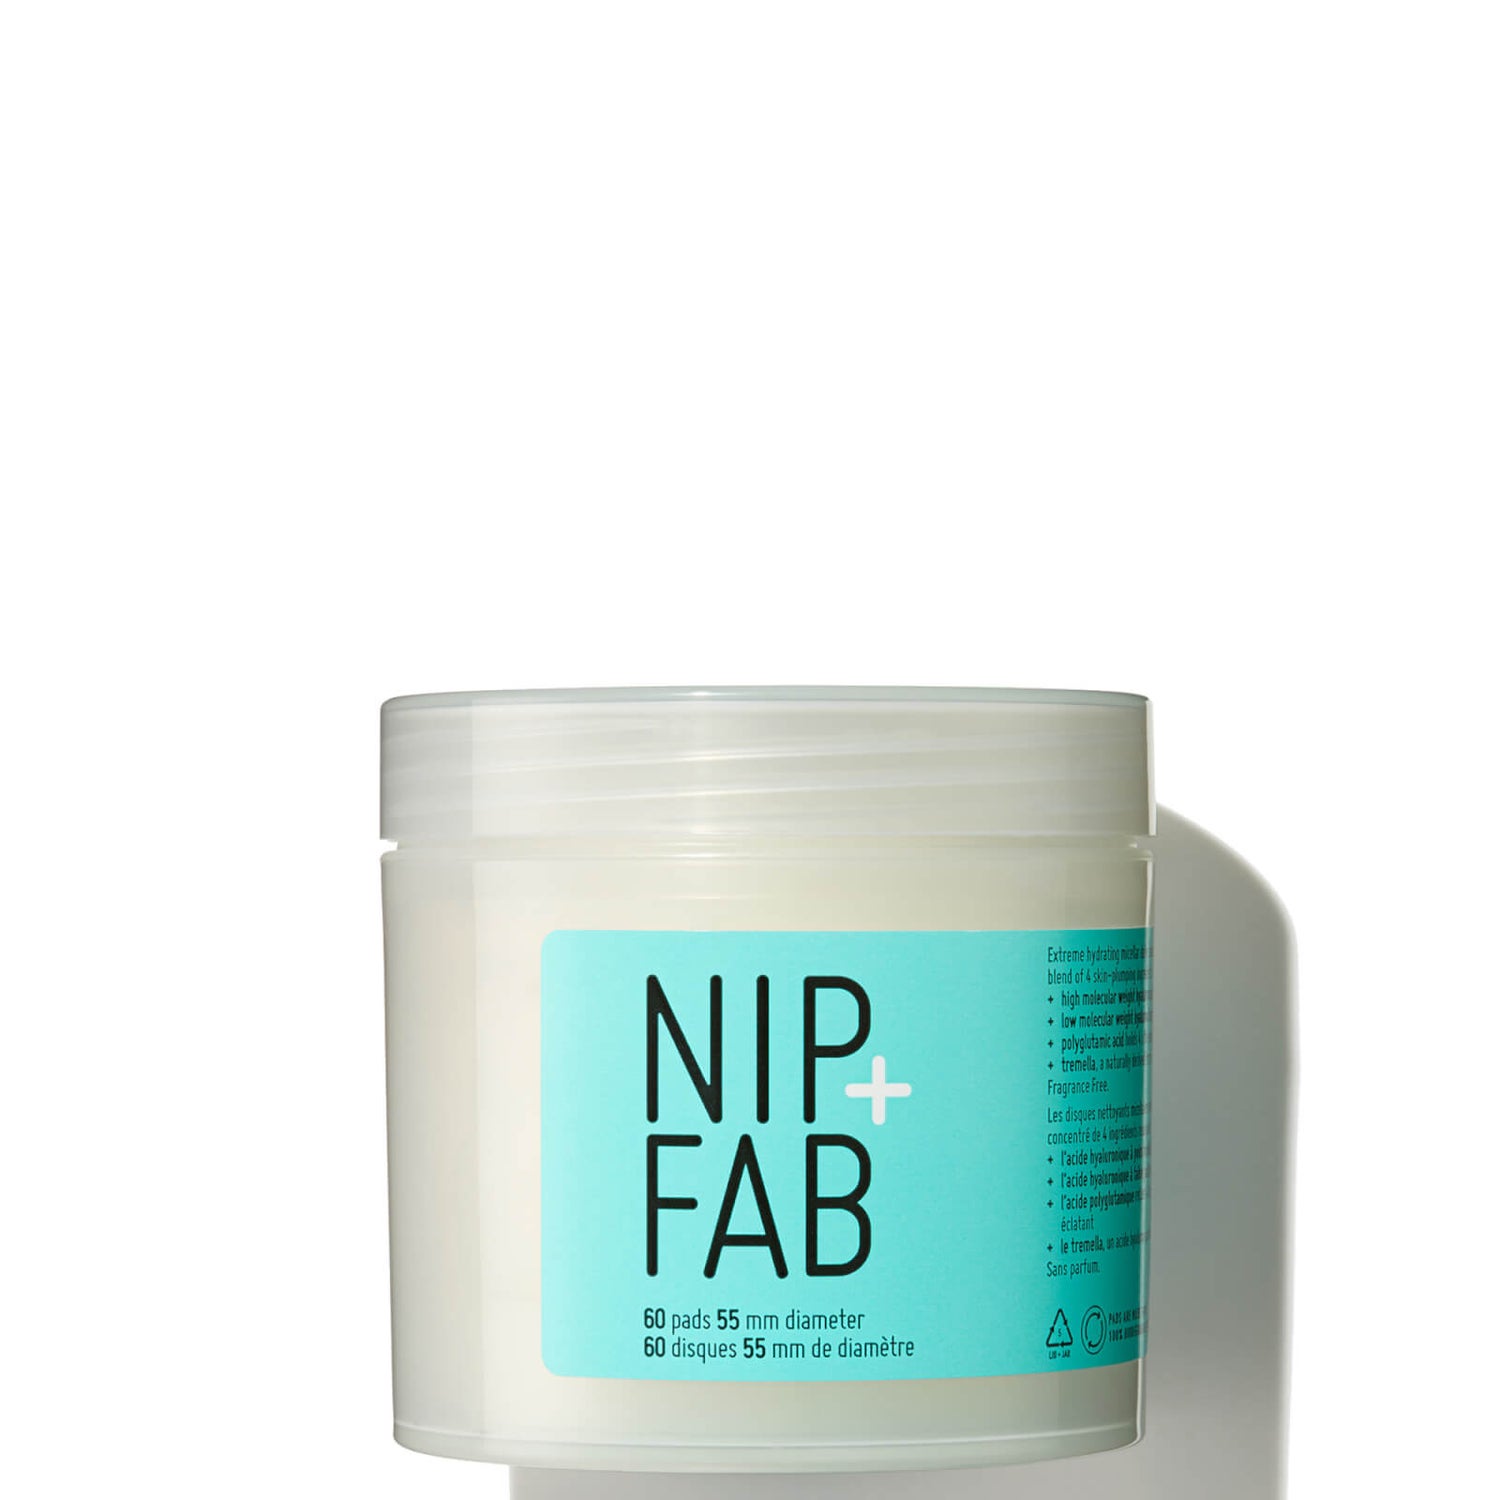 NIP+FAB Hyaluronic Fix Extreme4 Hydration Micellar Cleansing Pads (60 Pads)